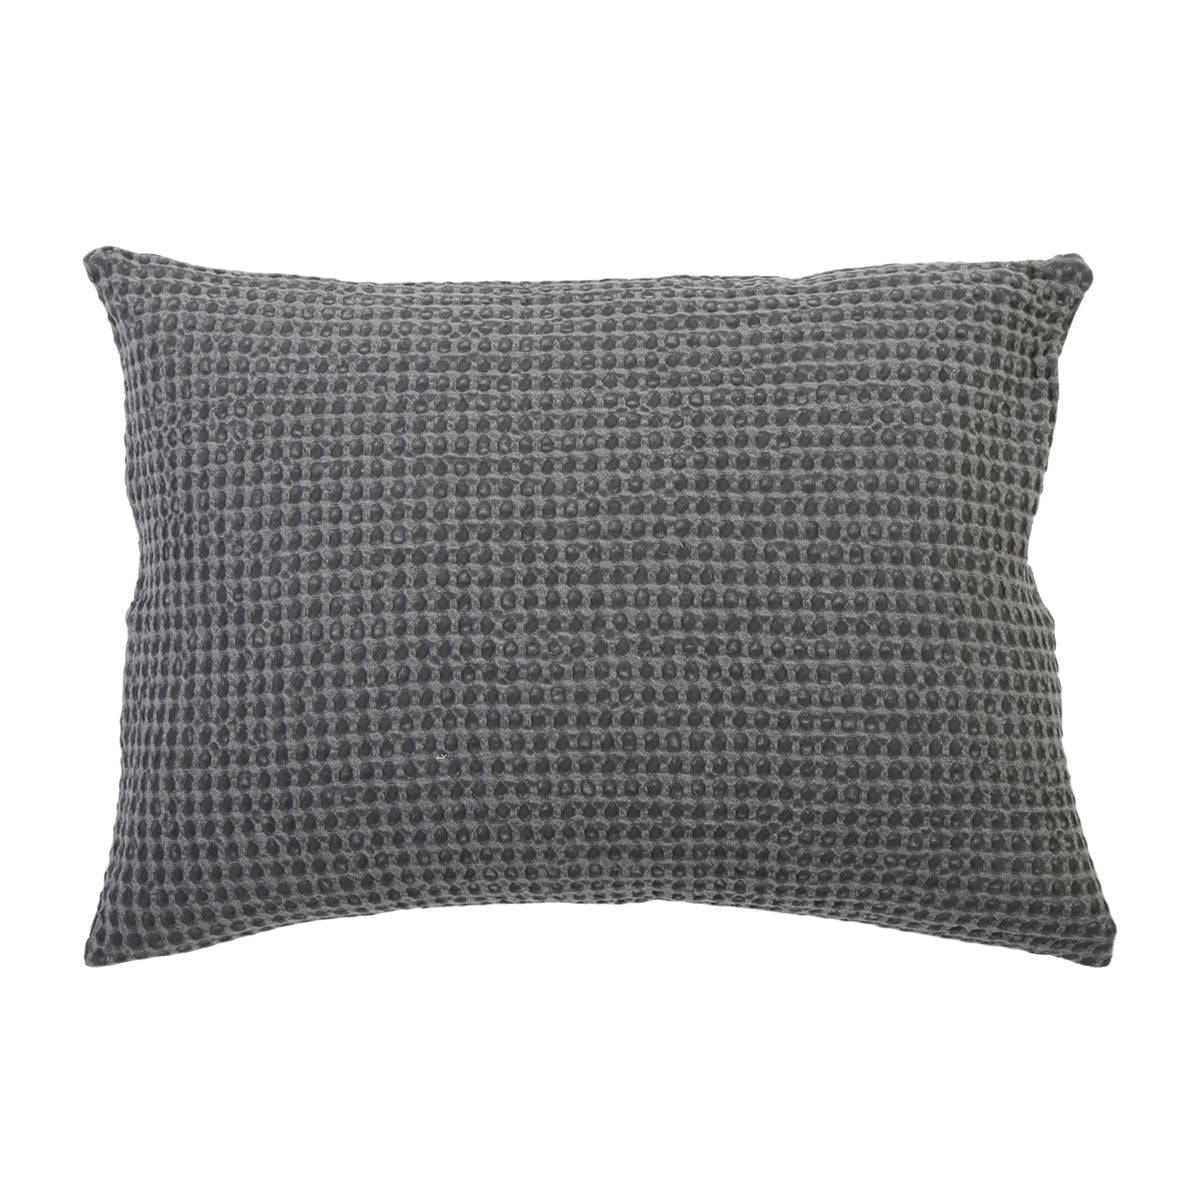 Bowie Filled Big Throw Pillow By Pom Pom At Home – Bella Vita